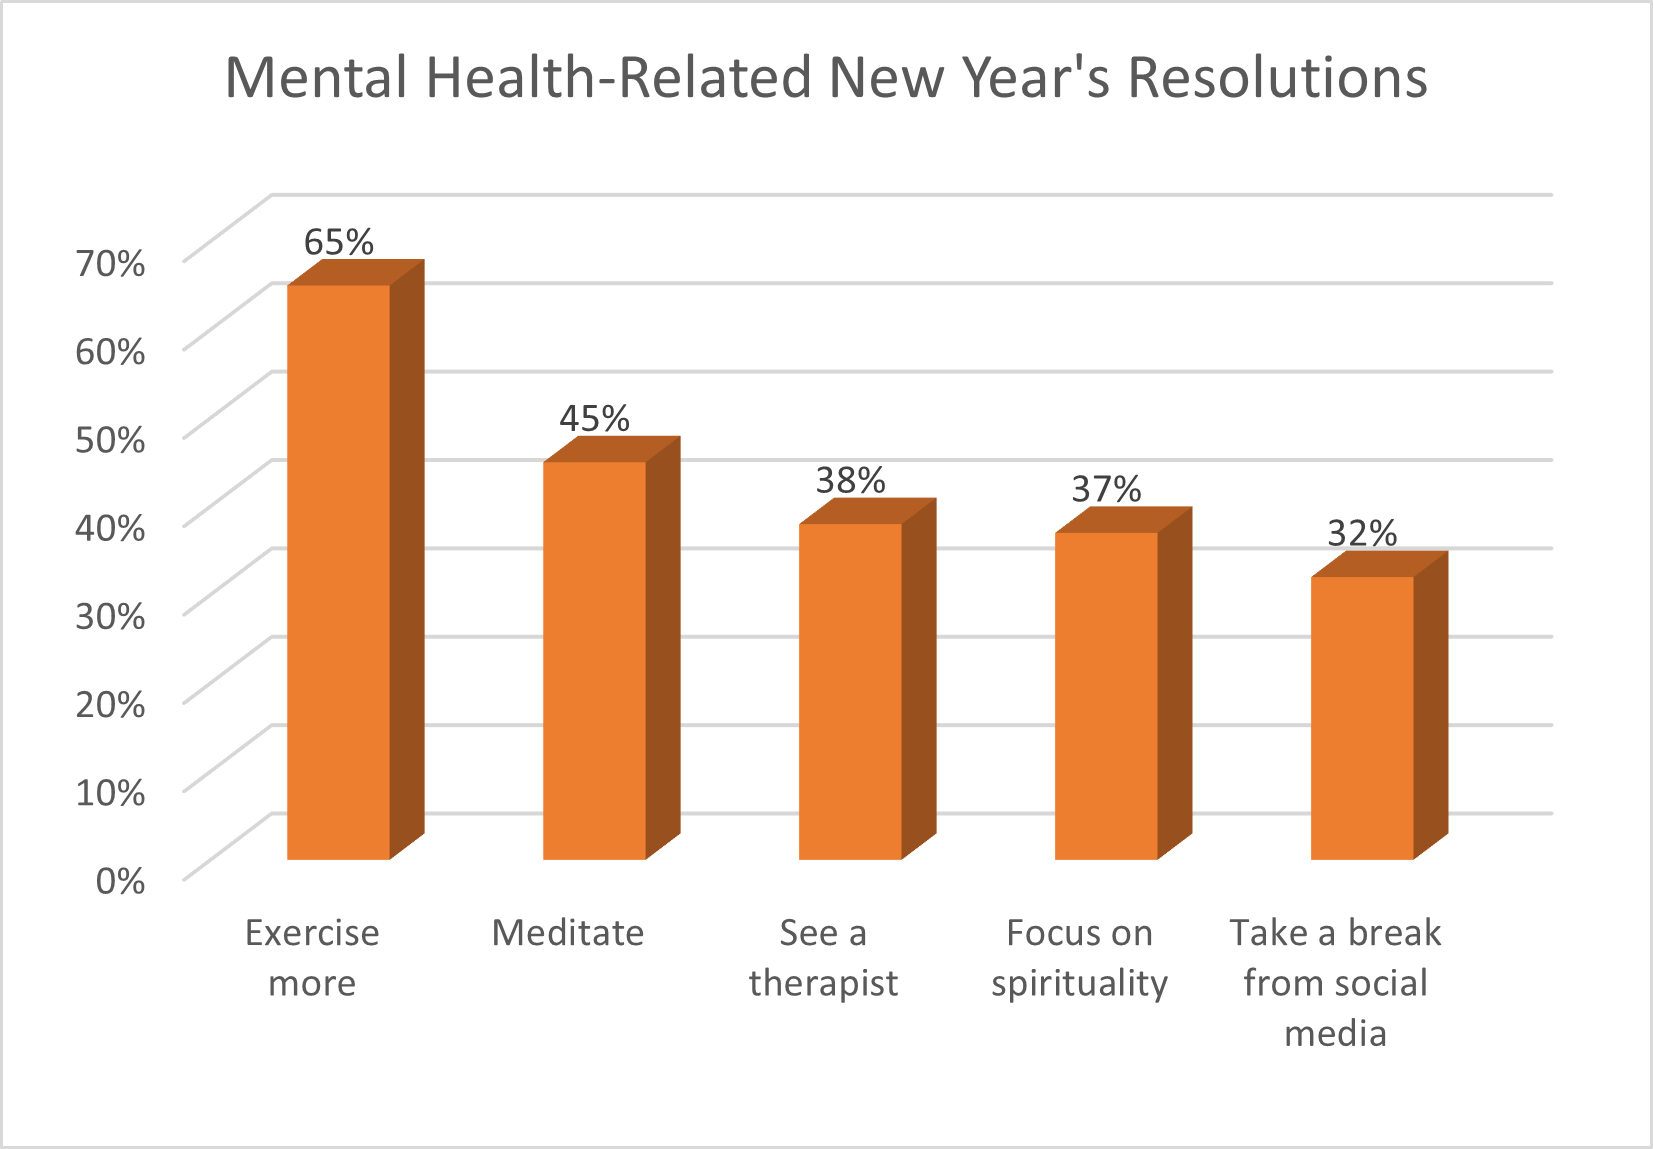 Mental health related New Year's resolutions